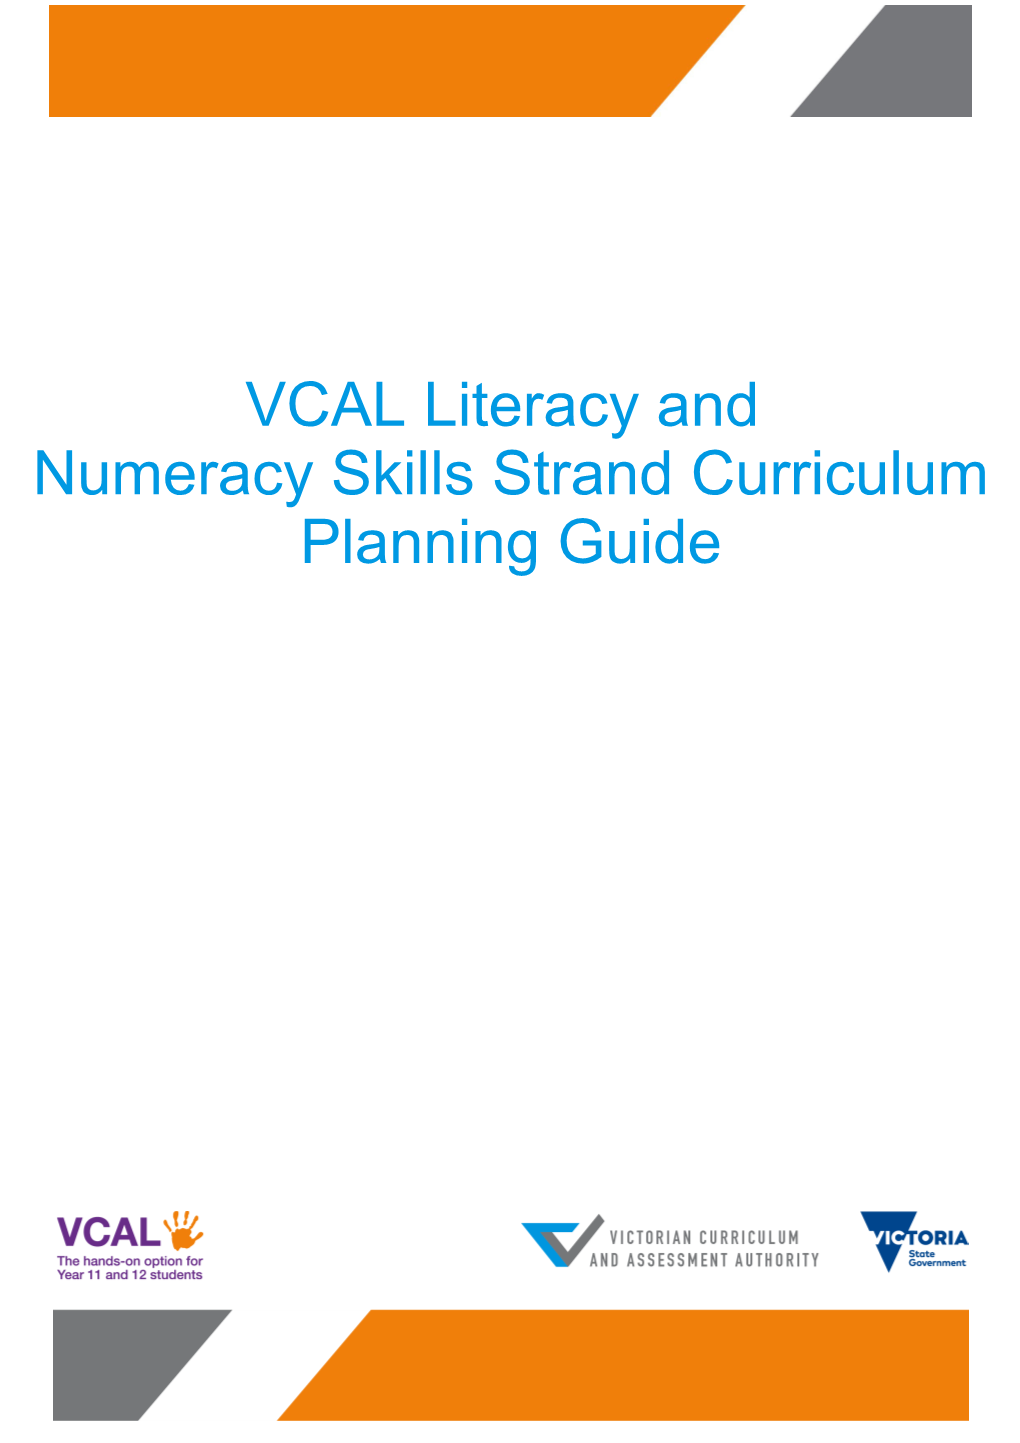 VCAL Literacy and Numeracy Skills Strand Curriculum Planning Guide